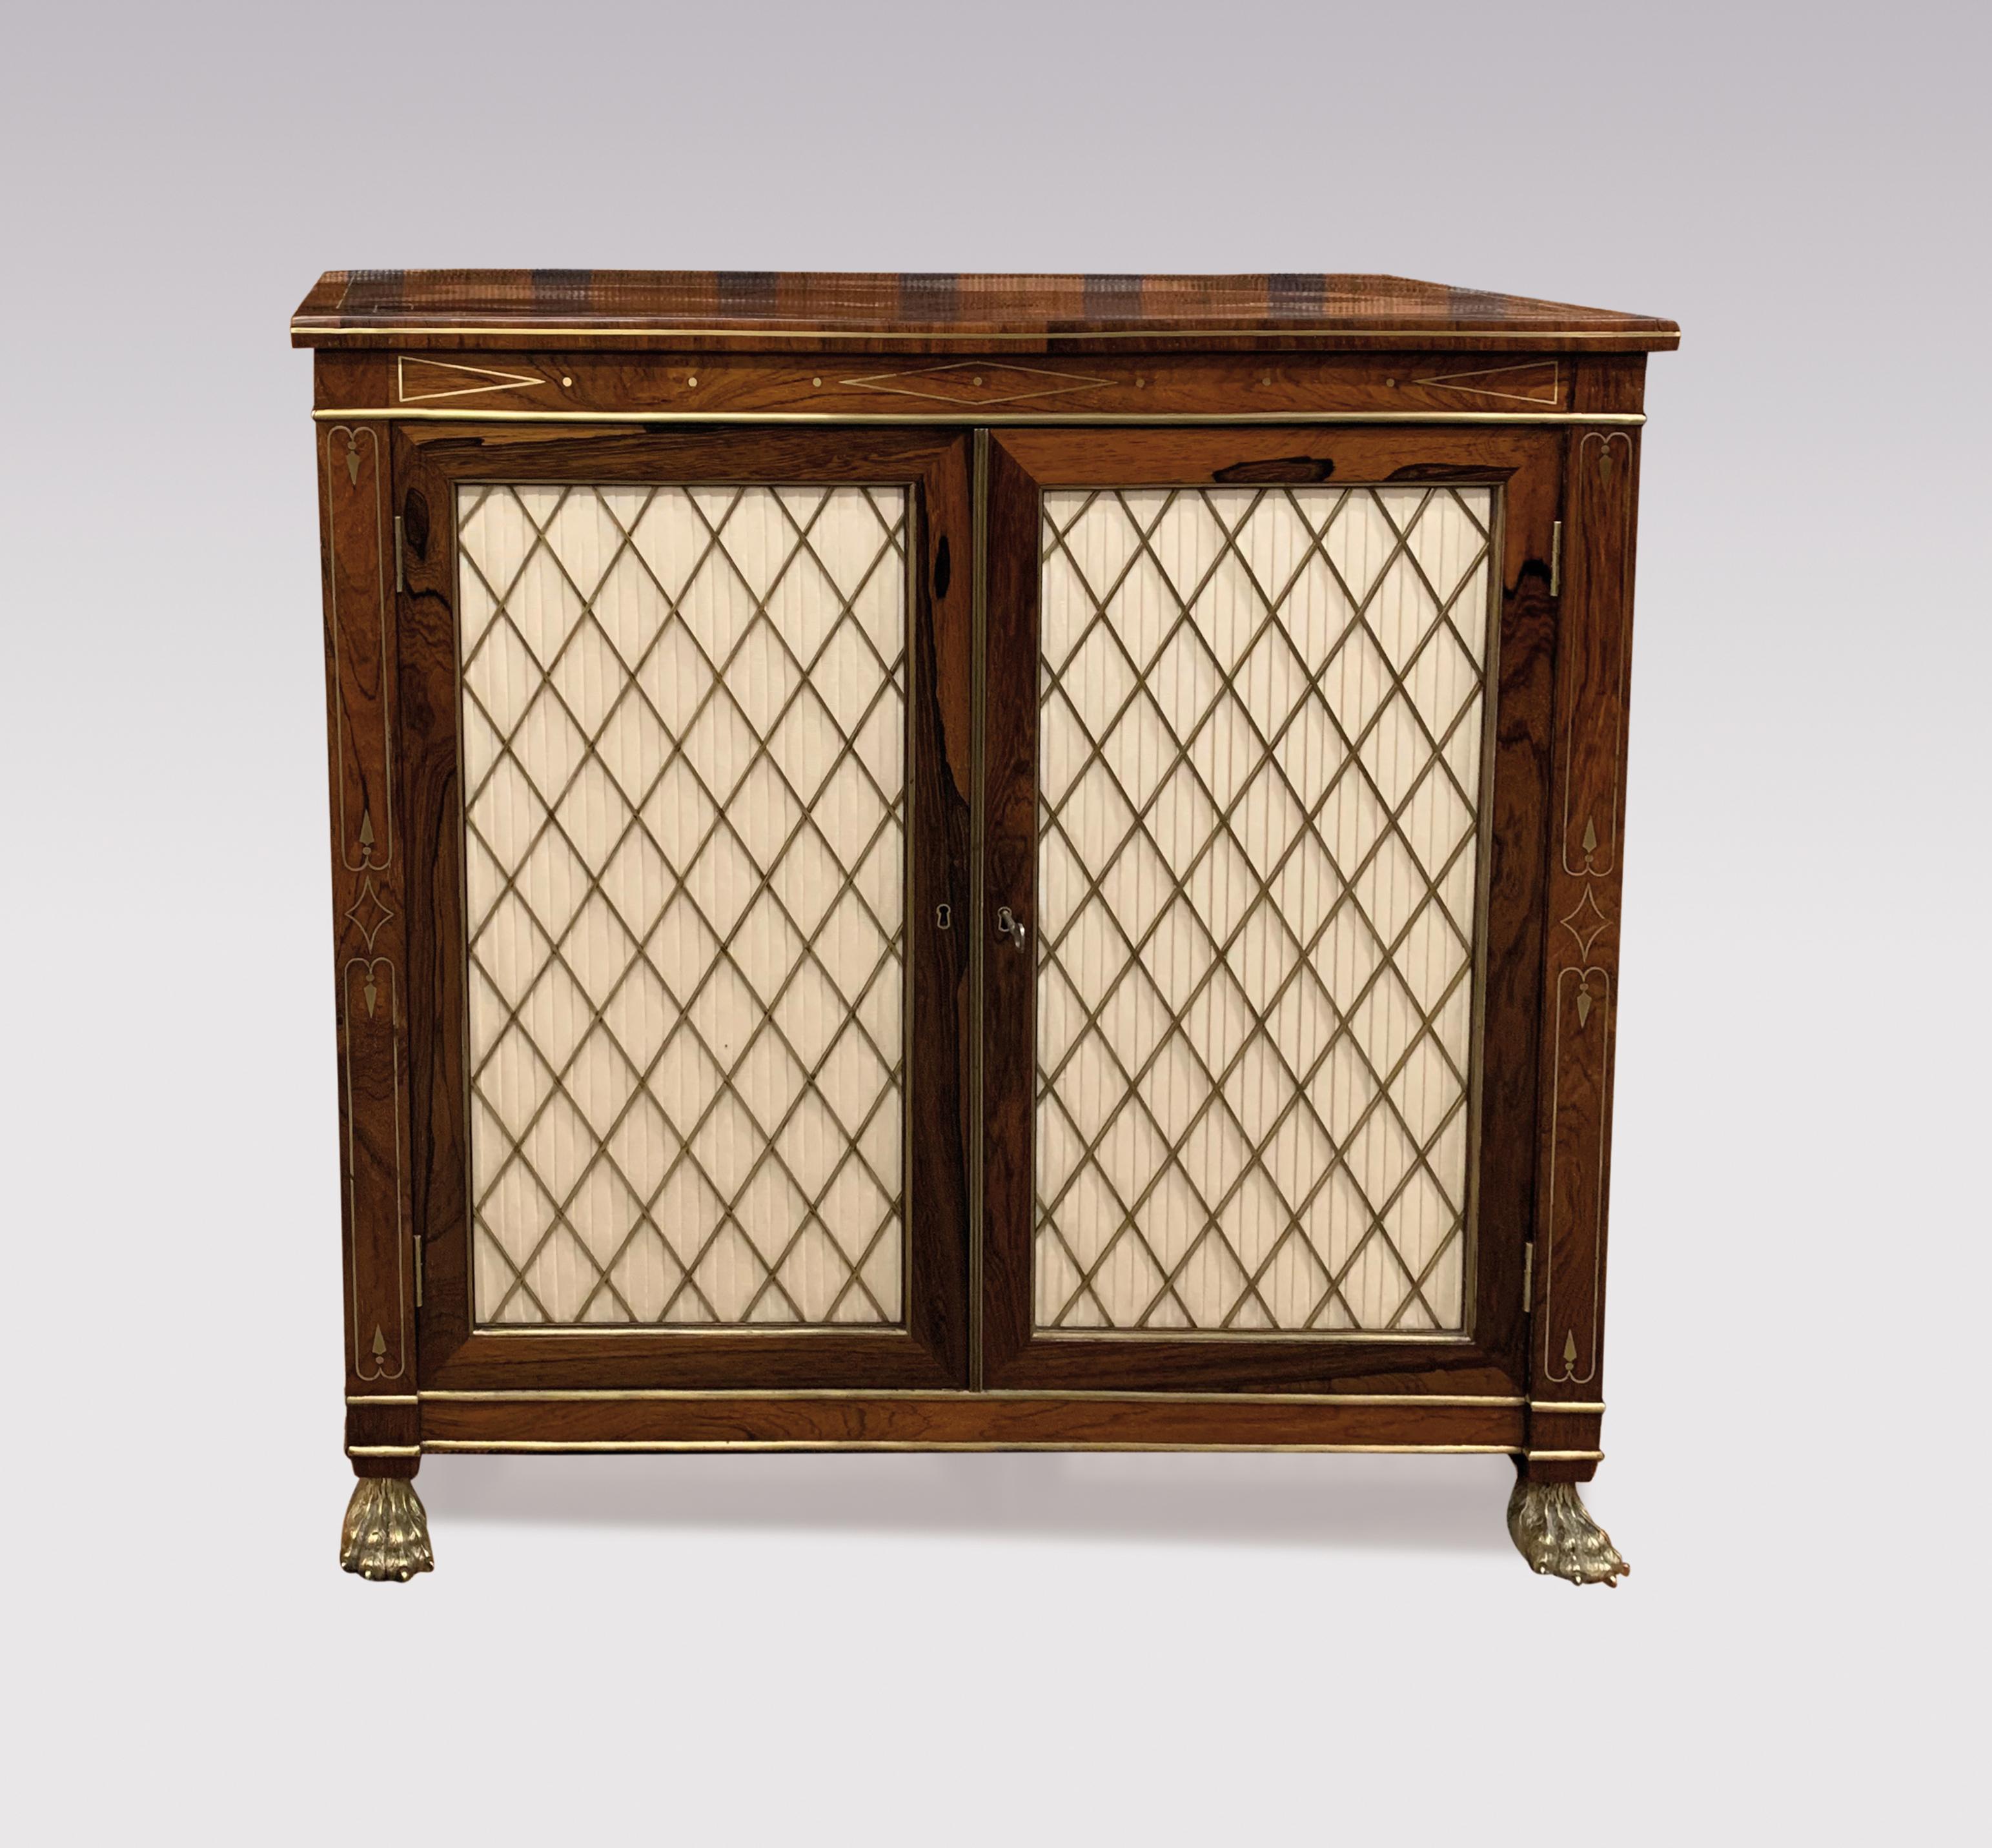 An early 19th century Regency period rosewood and brass line inlaid two door cabinet having pleated brass grille doors and satinwood banded sides, supported on original brass lions paw castors.